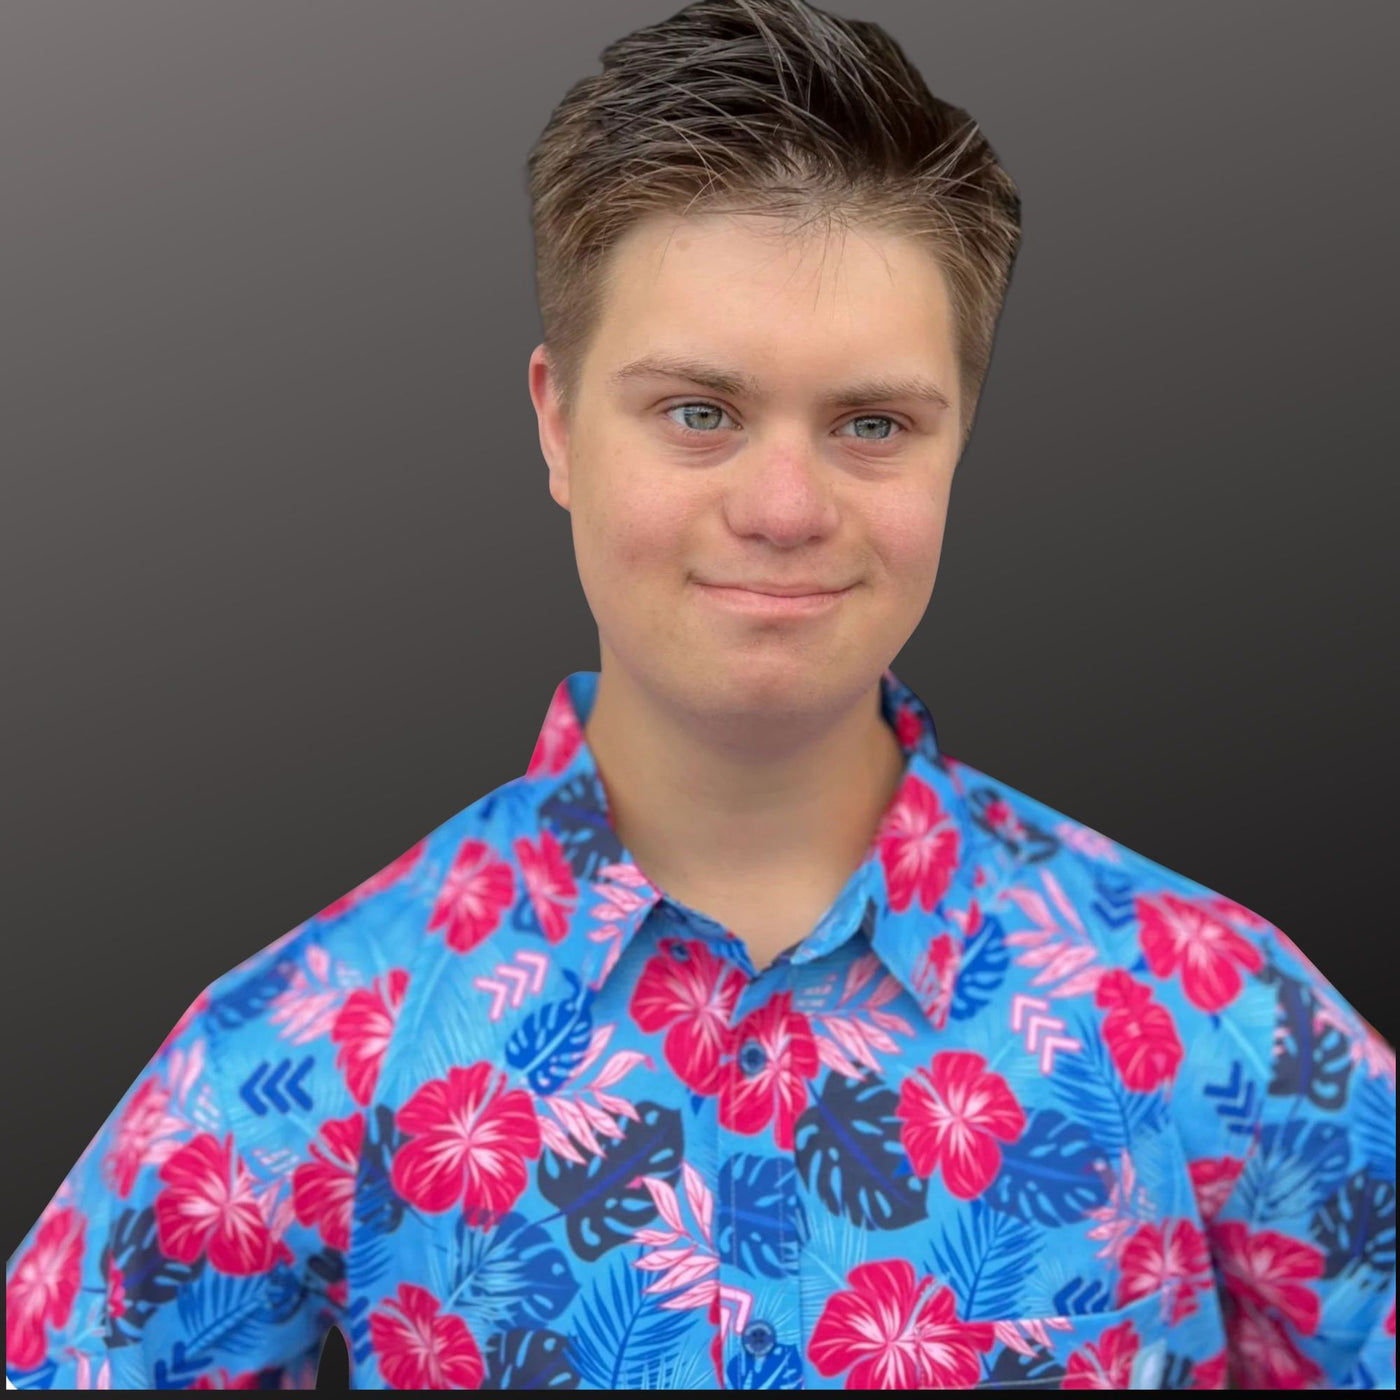 21 Pineapples "Floral Chevron" Button Up